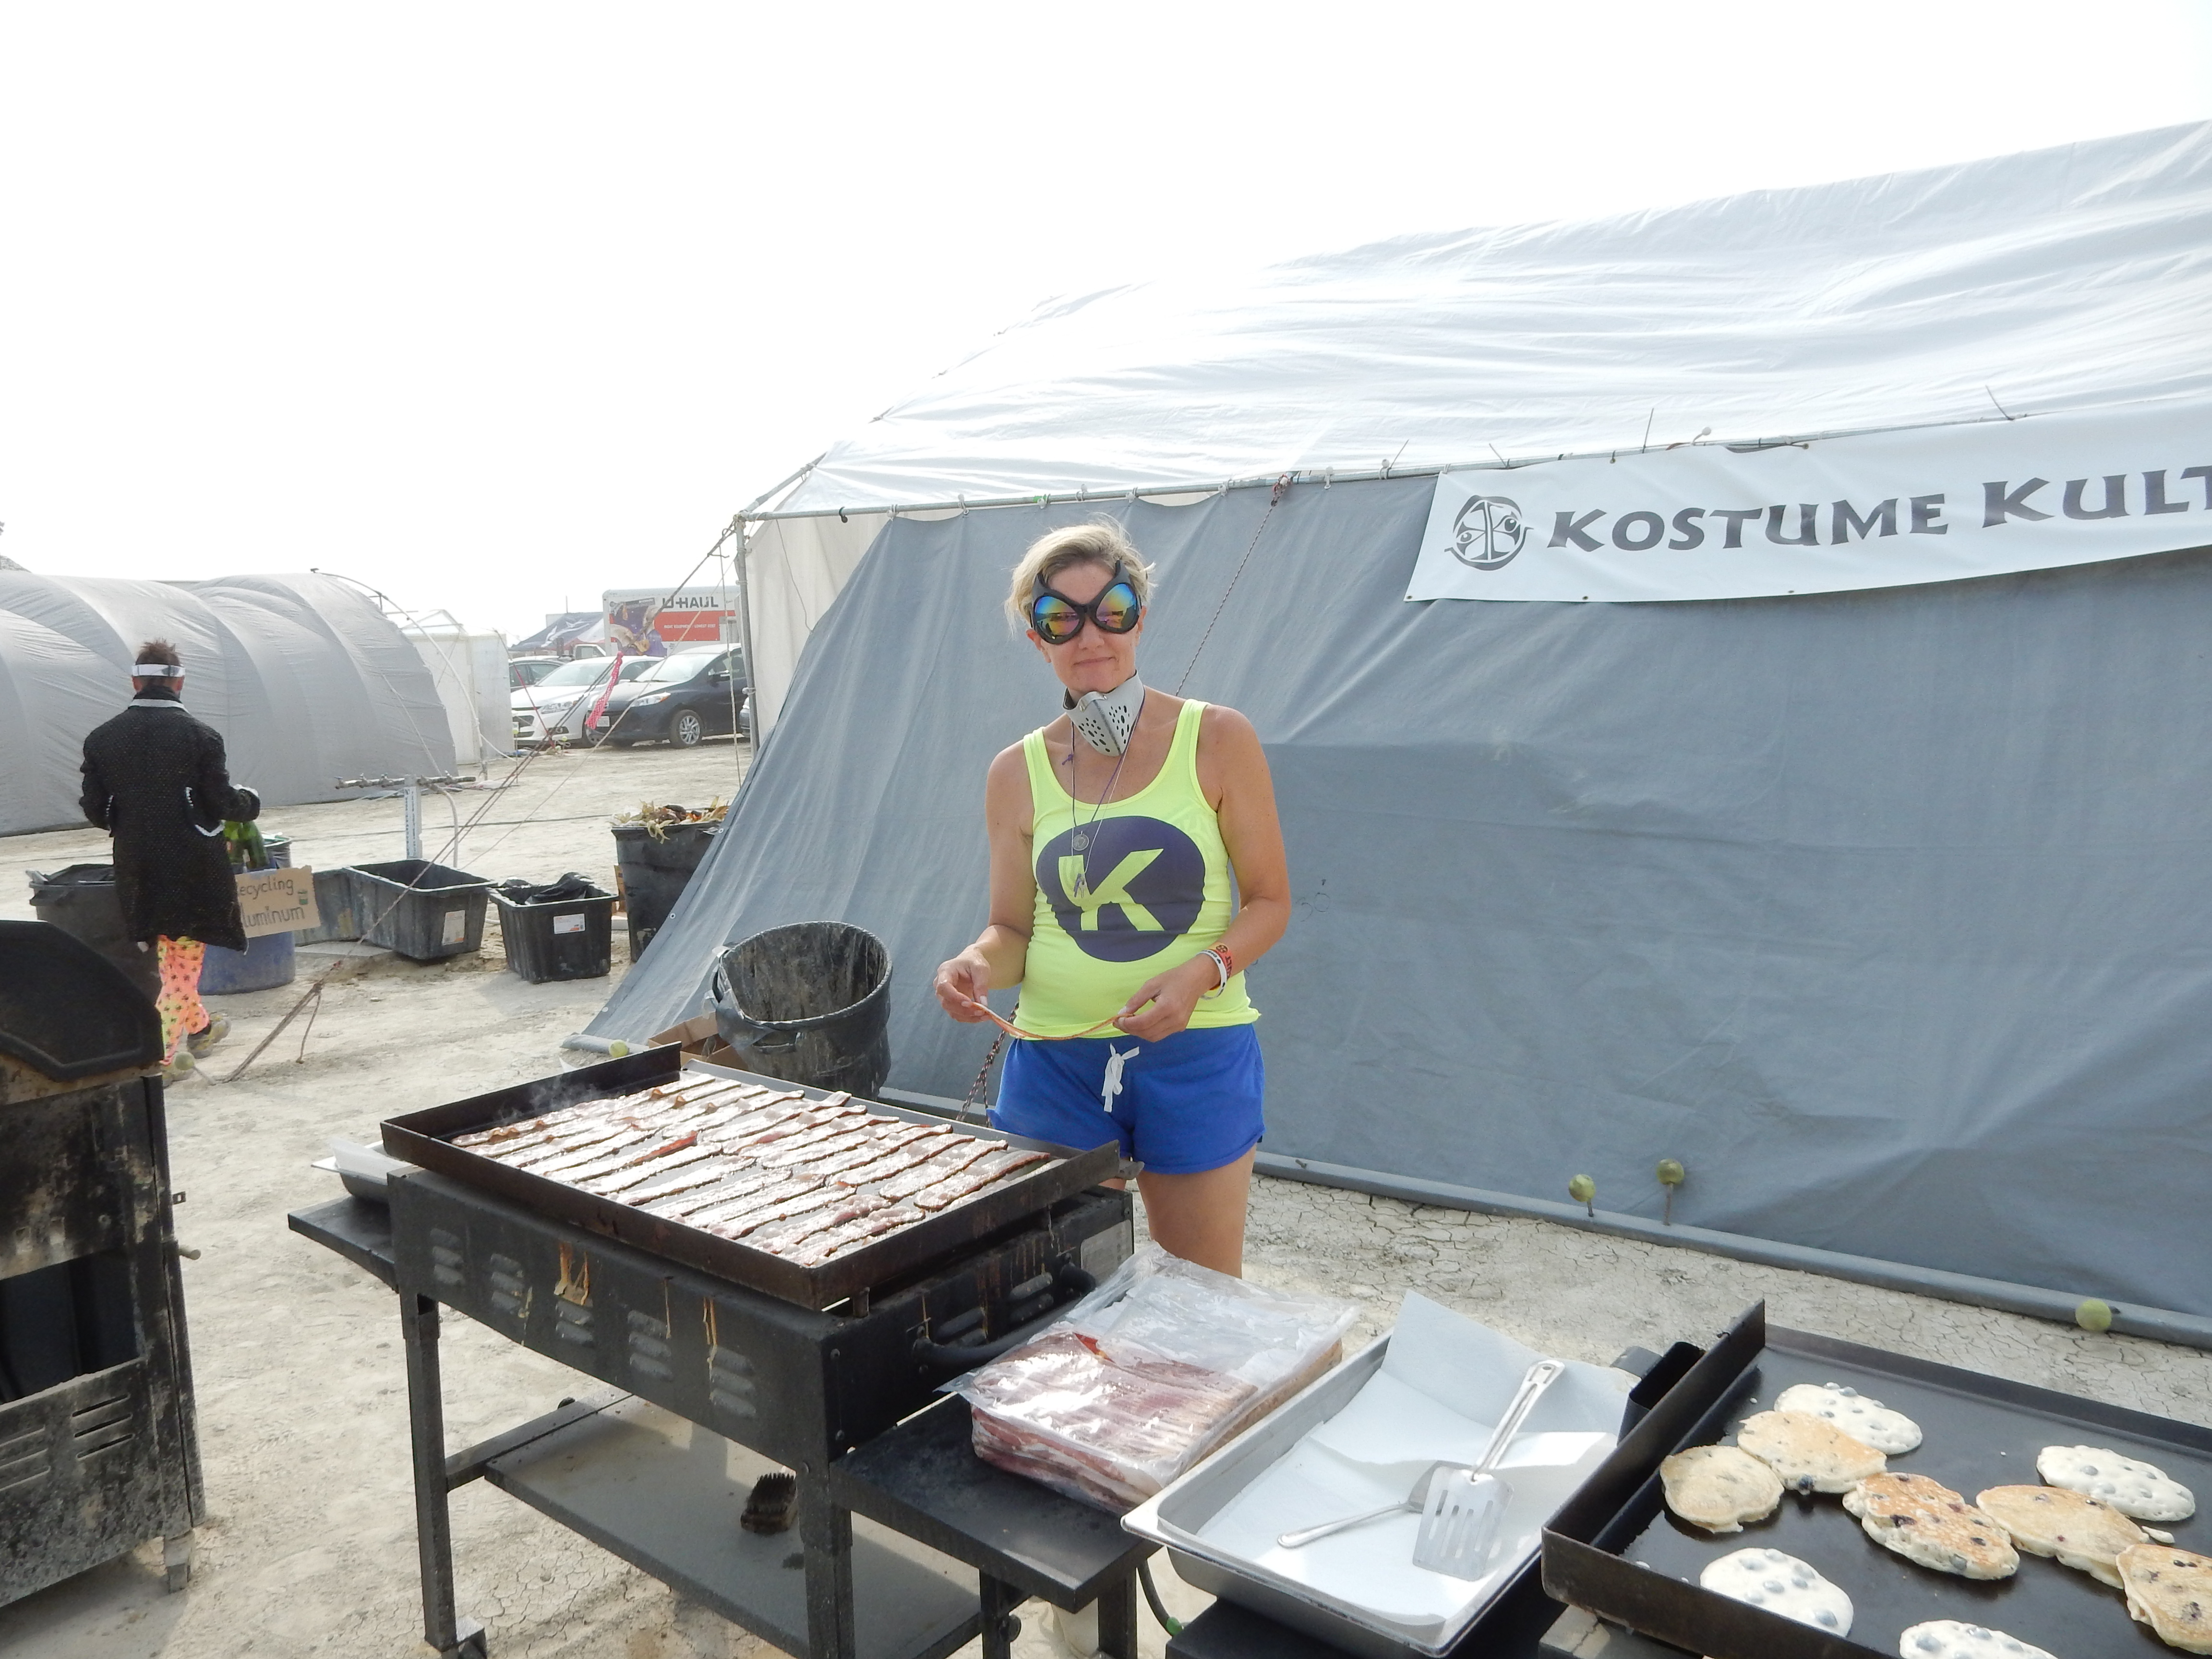 Give Me The Dirt – Eating At Burning Man (RV story part 2).